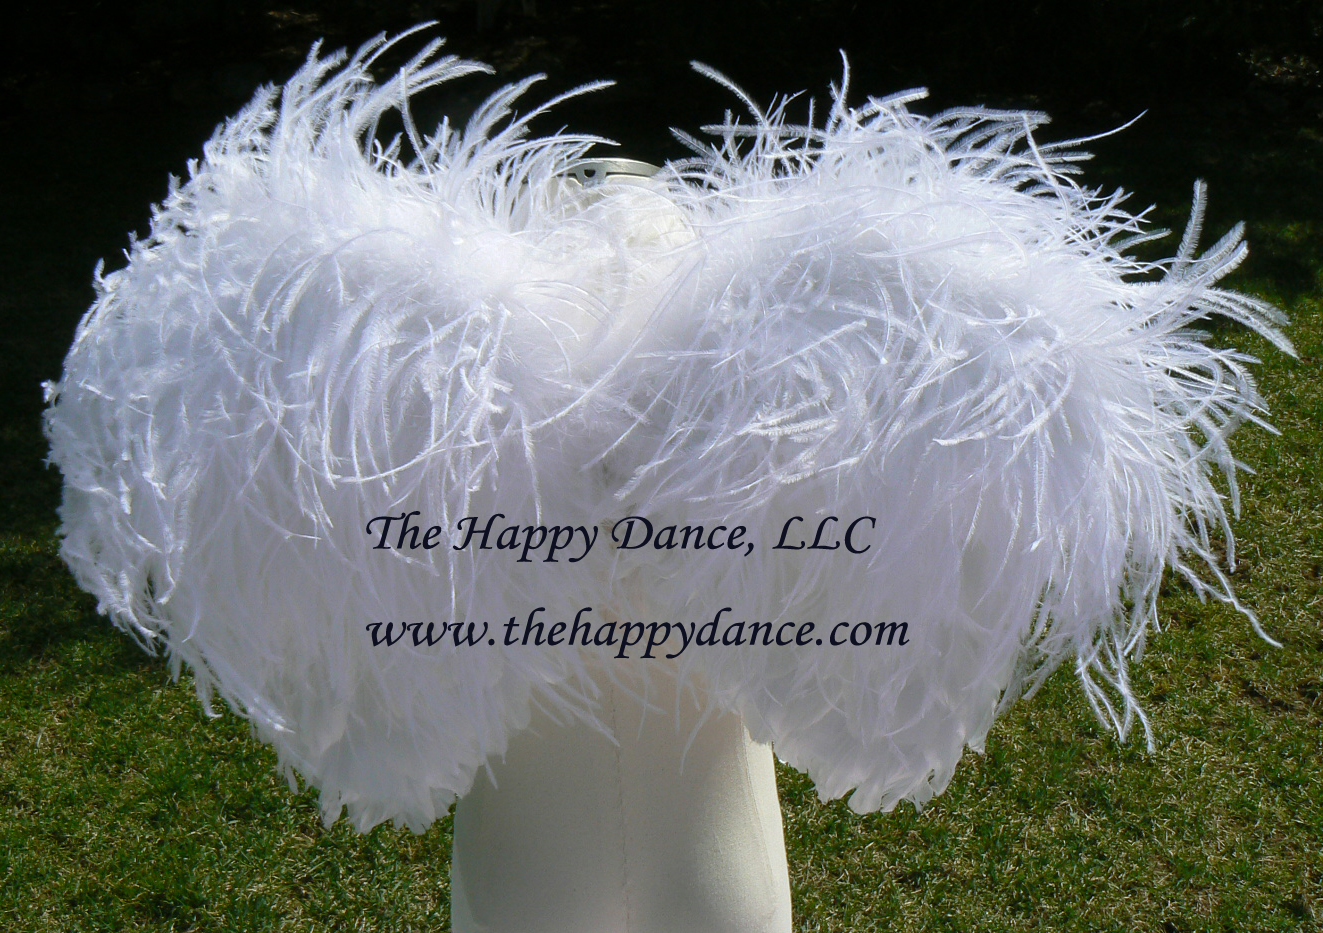 Long Ostrich Feathers, Long Feathers for Kids